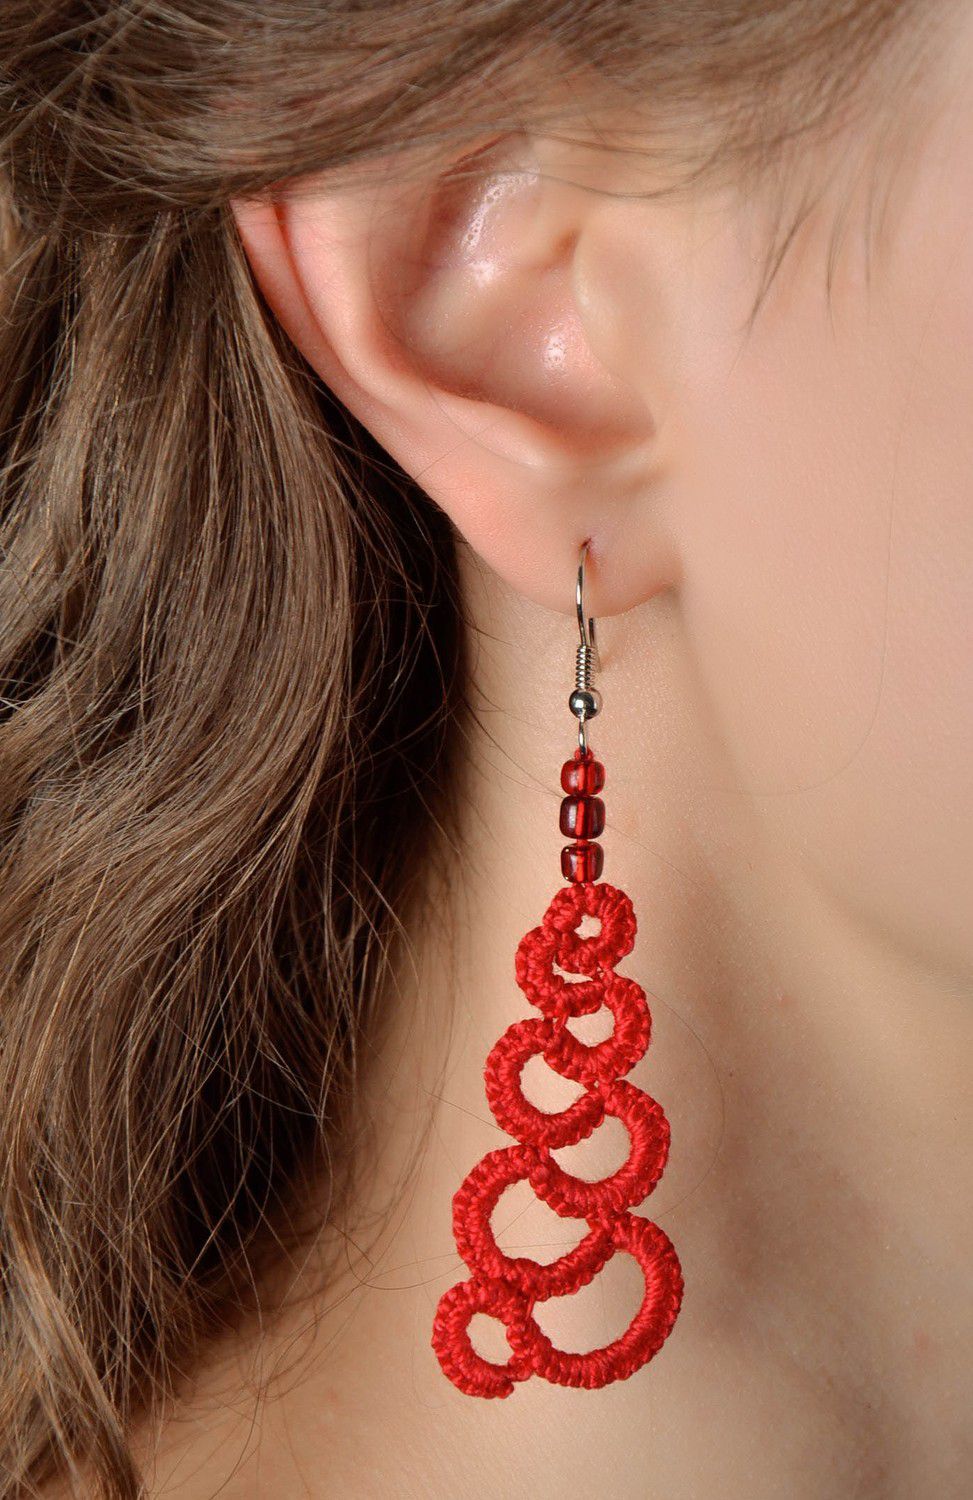 Scarlet earrings made from woven lace photo 4